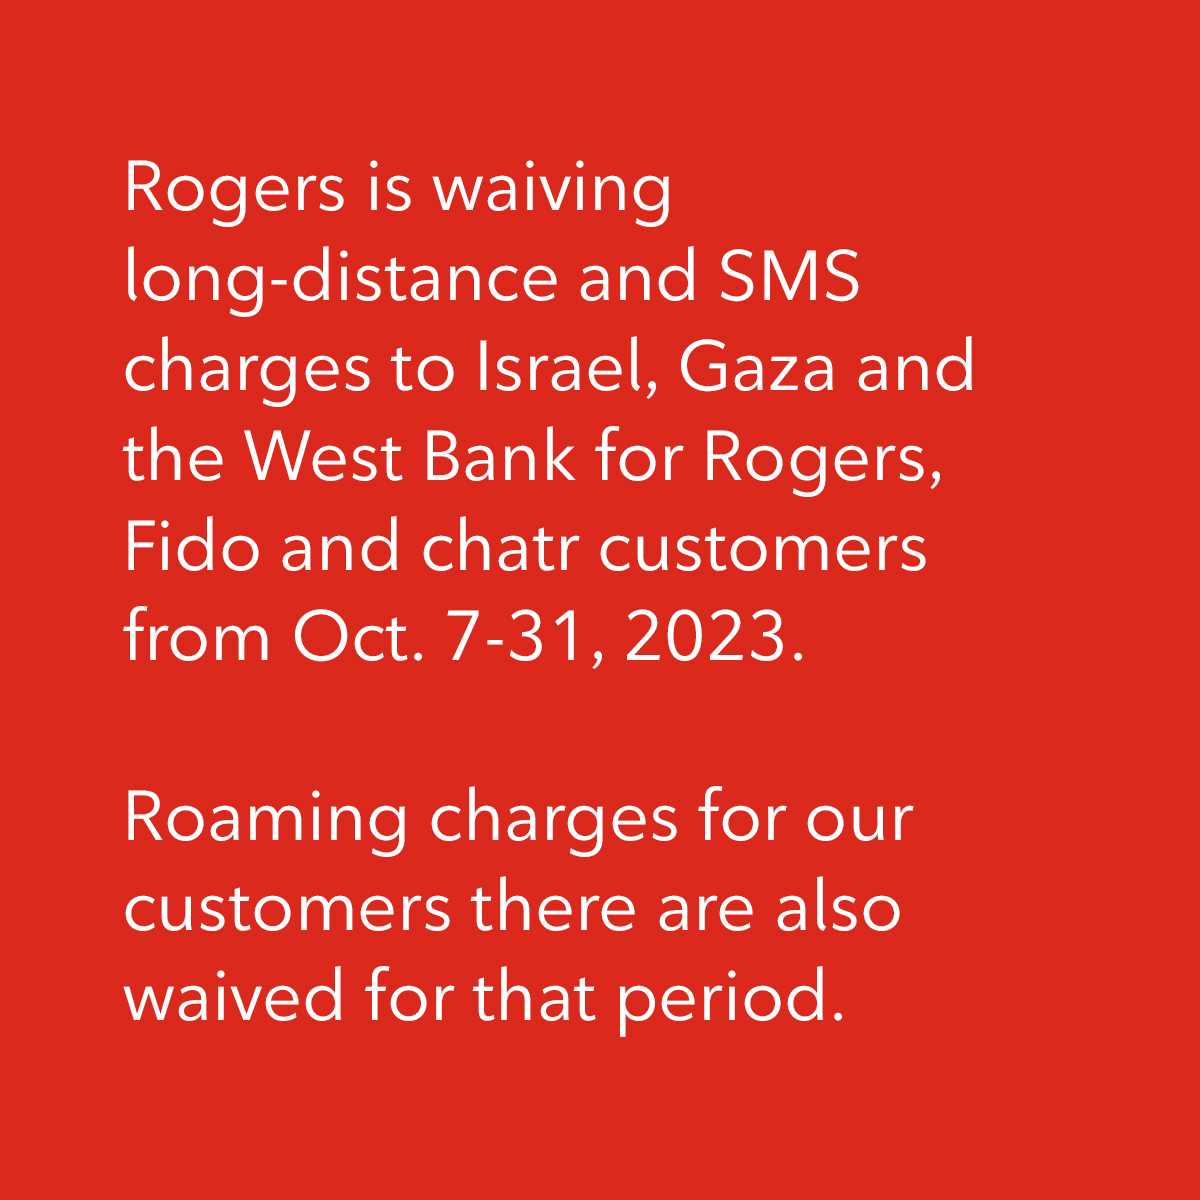 Rogers is waiving long-distance and SMS charges to Israel, Gaza and the West Bank for Rogers, Fido and chatr customers from Oct. 7-31, 2023. Roaming charges for our customers there are also waived for that period.